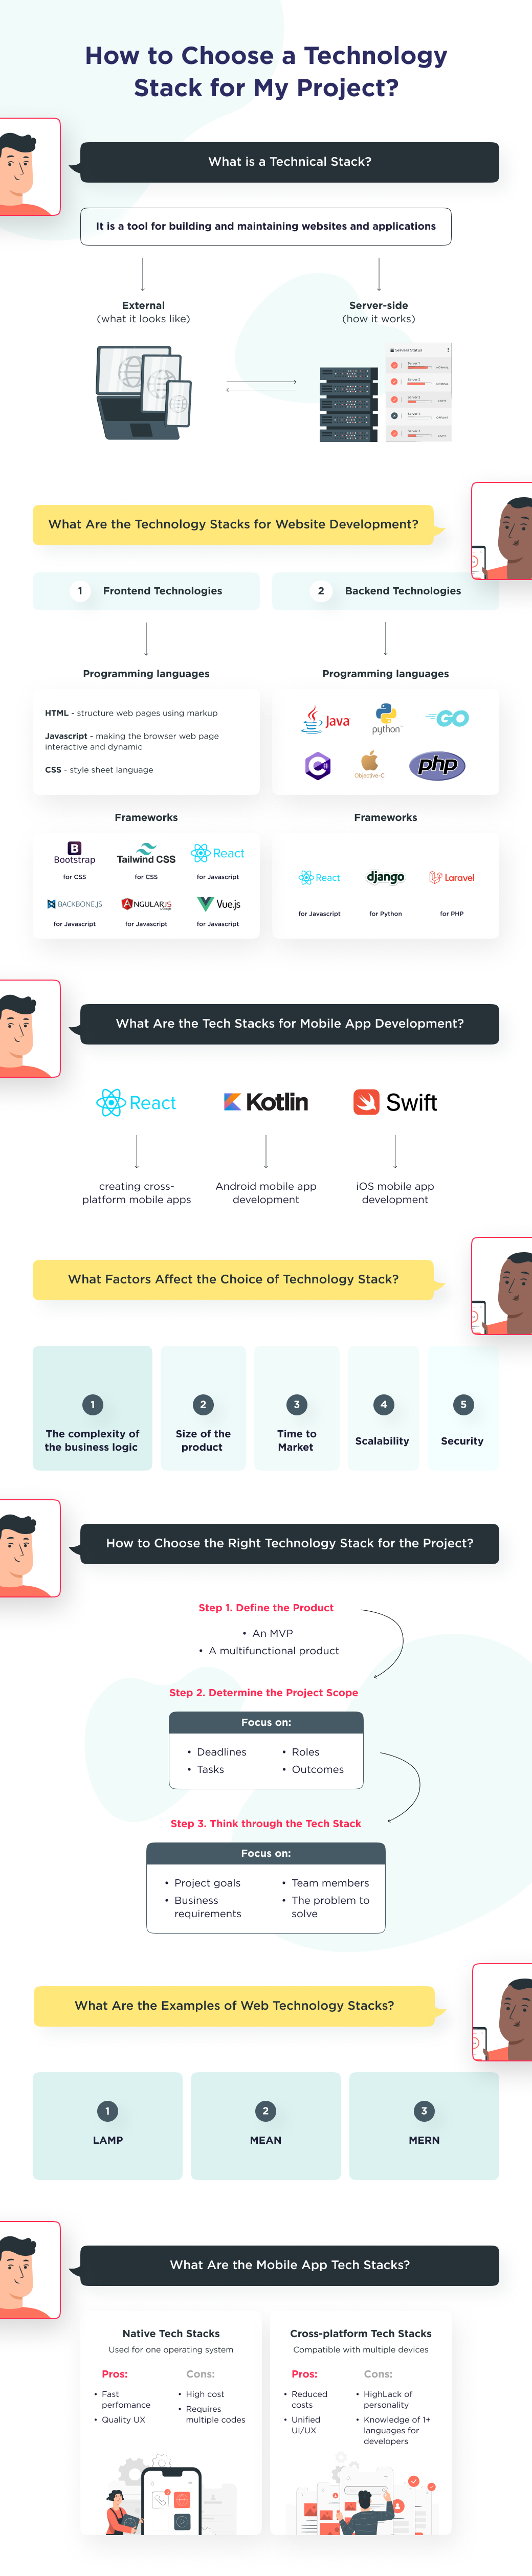 This infographic shows the basic steps to choose a technology stack for project